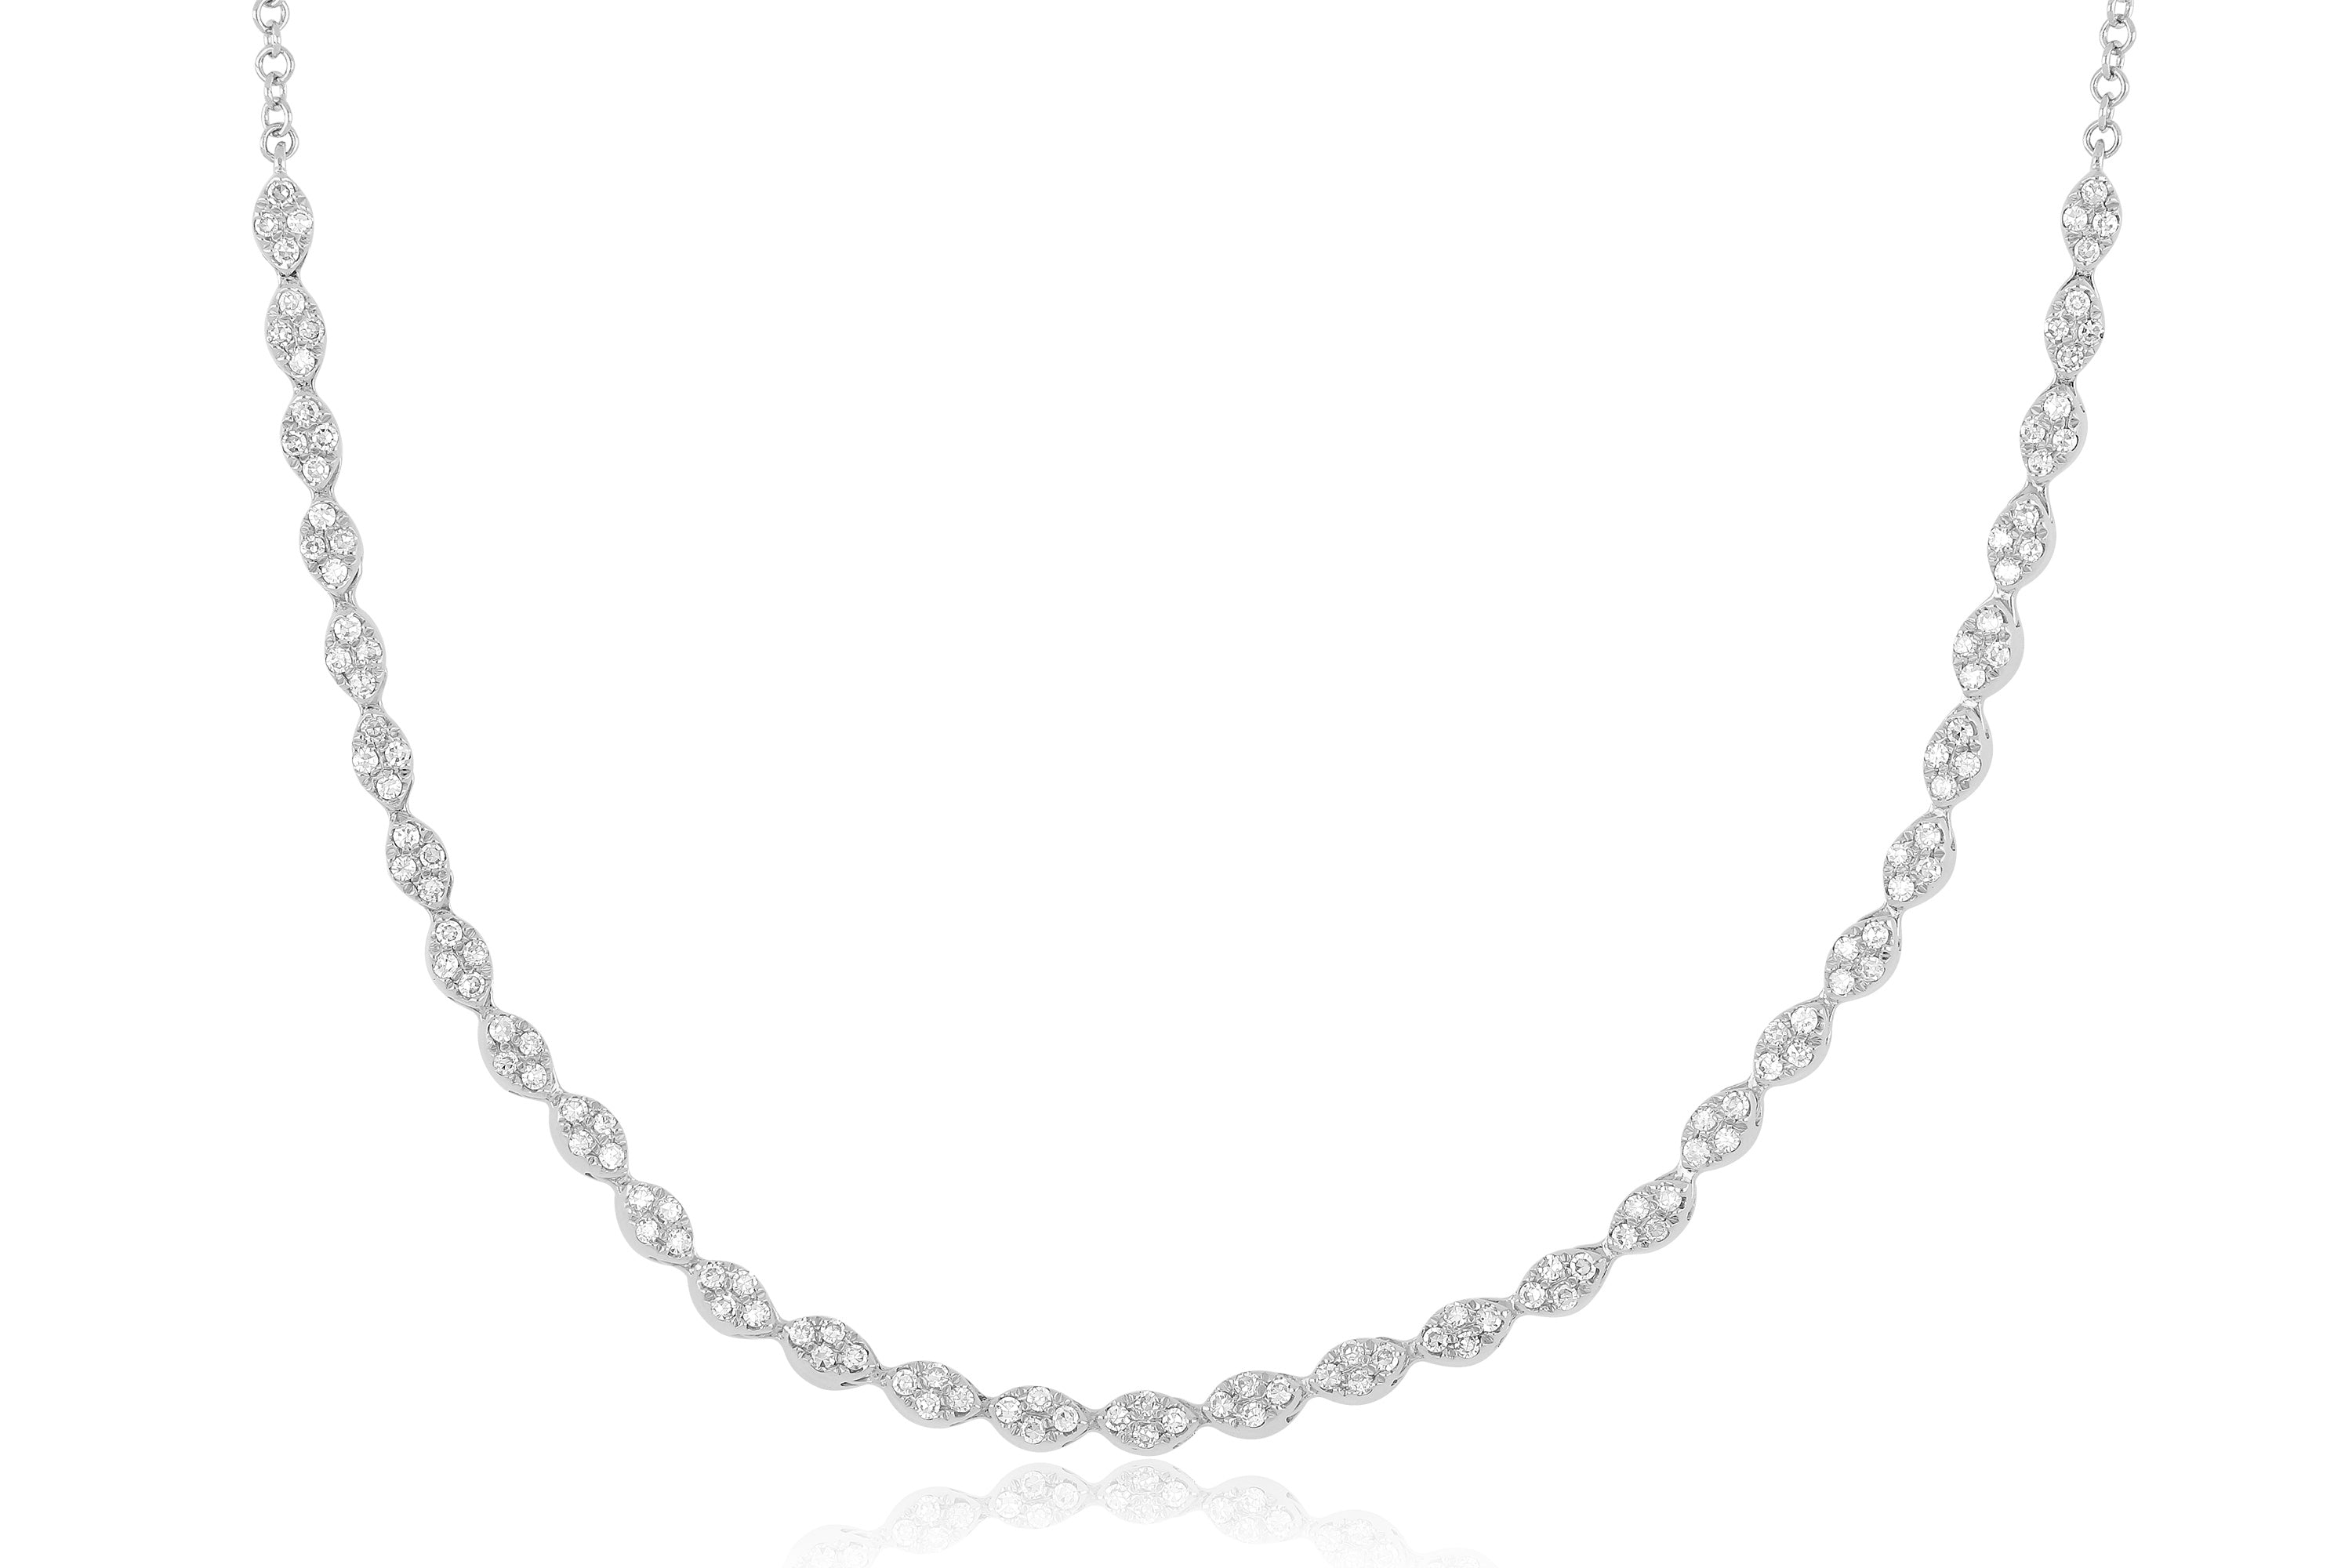 Pave Diamond Marquise Necklace in white gold